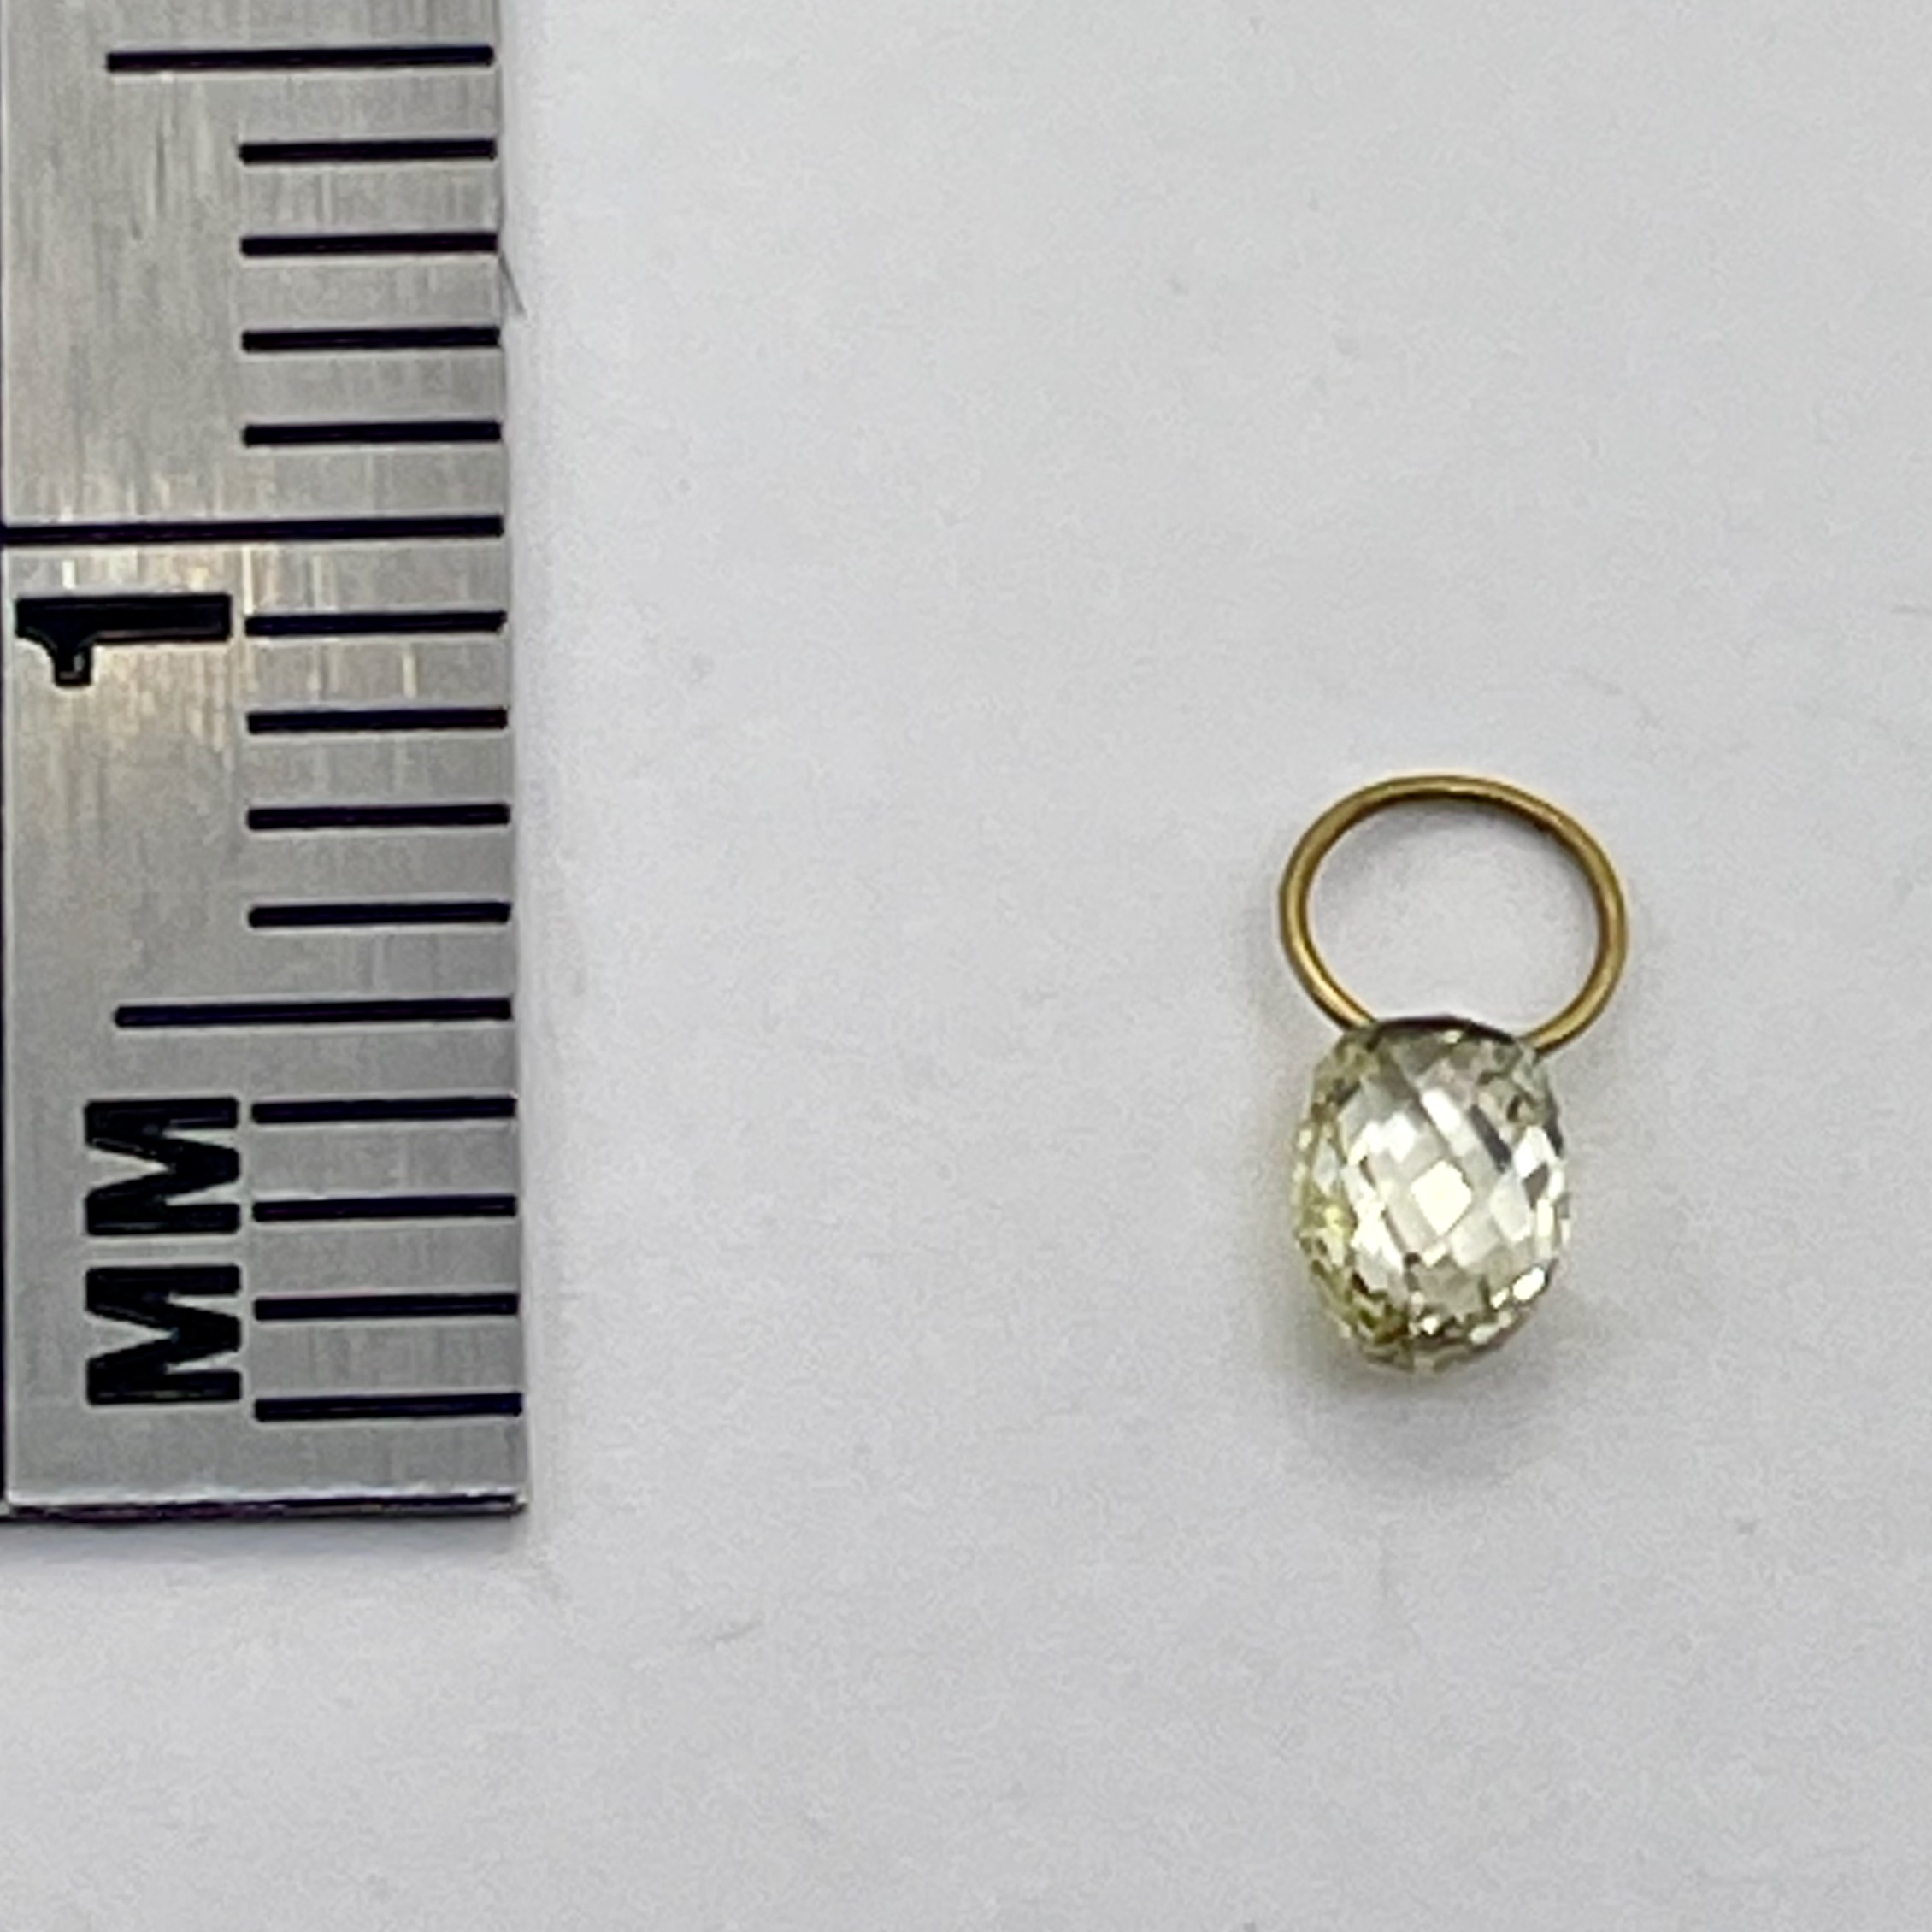 0.26cts Natural Canary Diamond & 18K Gold Pendant | 3.5x2.5x2mm | 1 Bead | - image 5 of 12